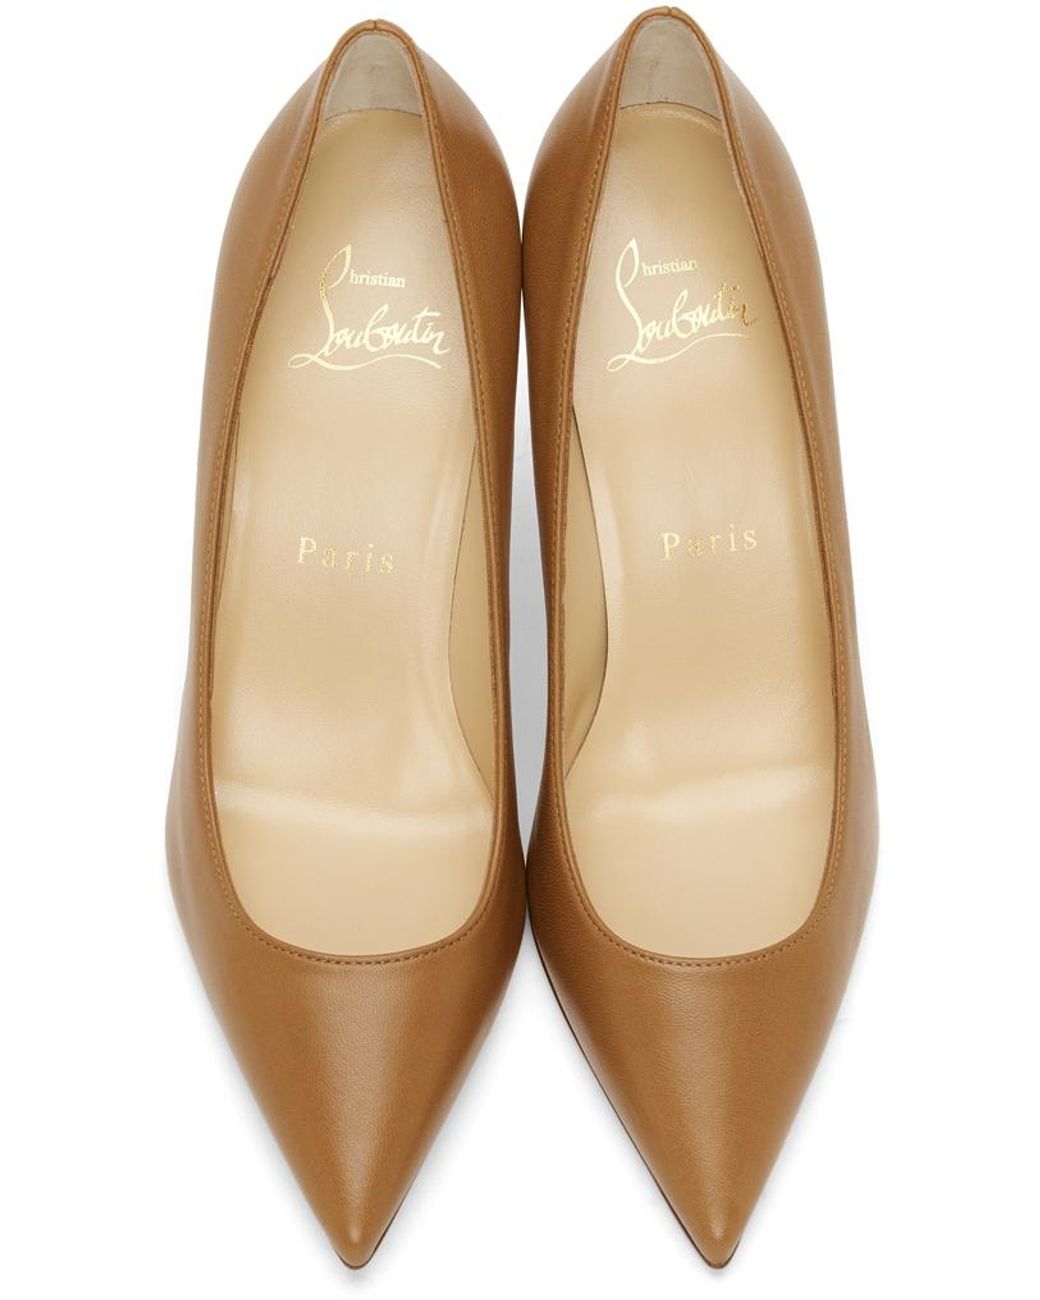 newness affald Imagination Christian Louboutin Kate 85 Leather Pumps in Tan (Brown) - Save 29% - Lyst